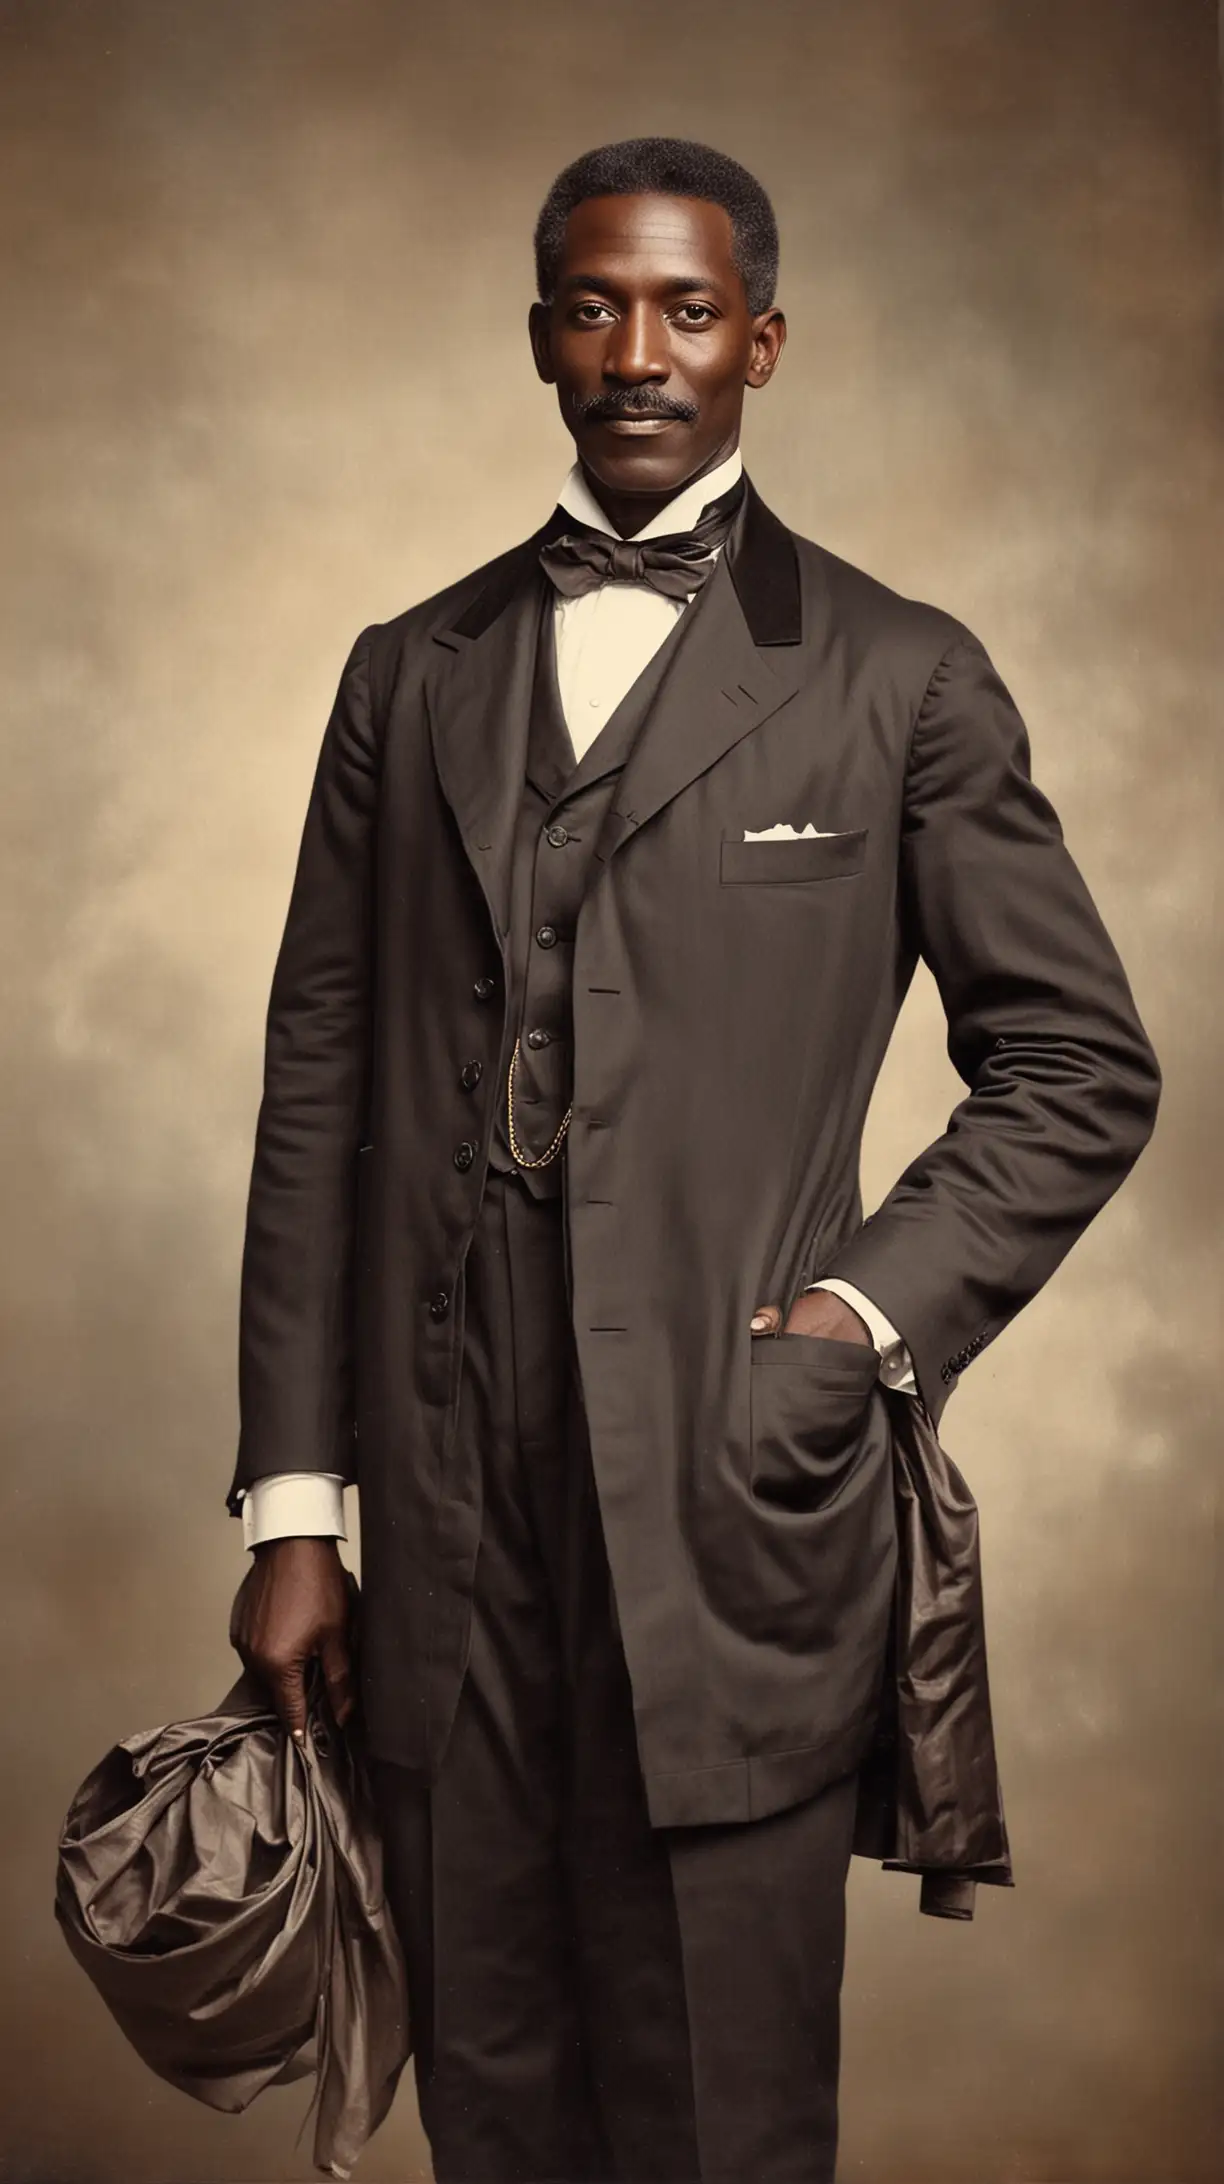 Portrait of Thomas L Jennings Distinguished African American Inventor of Dry Cleaning